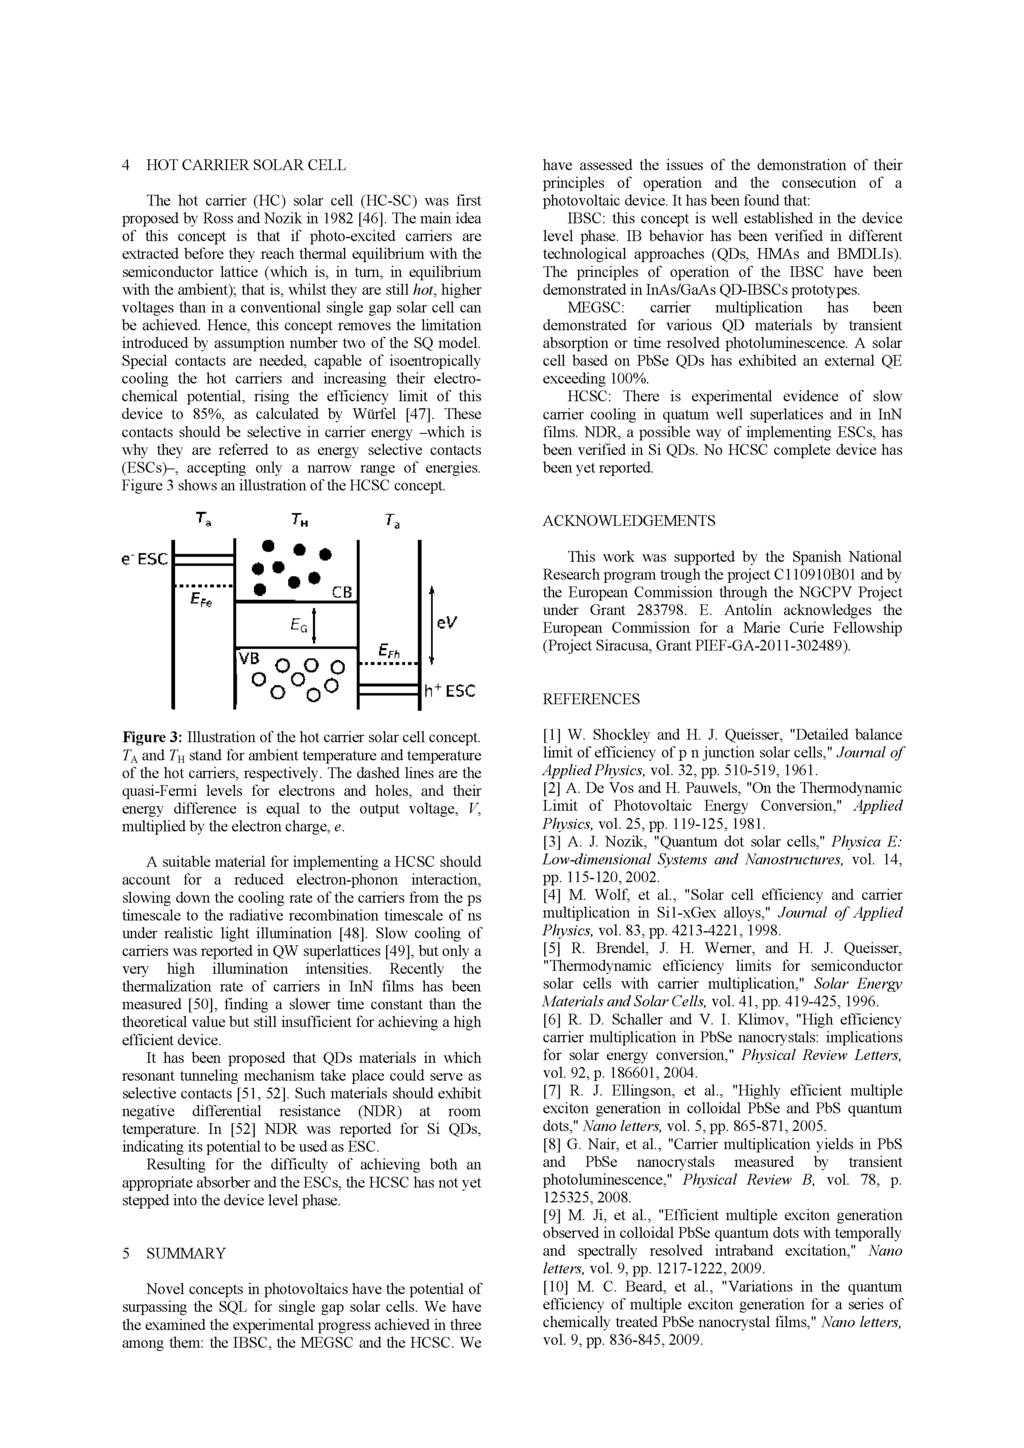 4 HOT CARRIER SOLAR CELL The hot carrier (HC) solar cell (HC-SC) was first proposed by Ross and Nozik in 1982 [46].